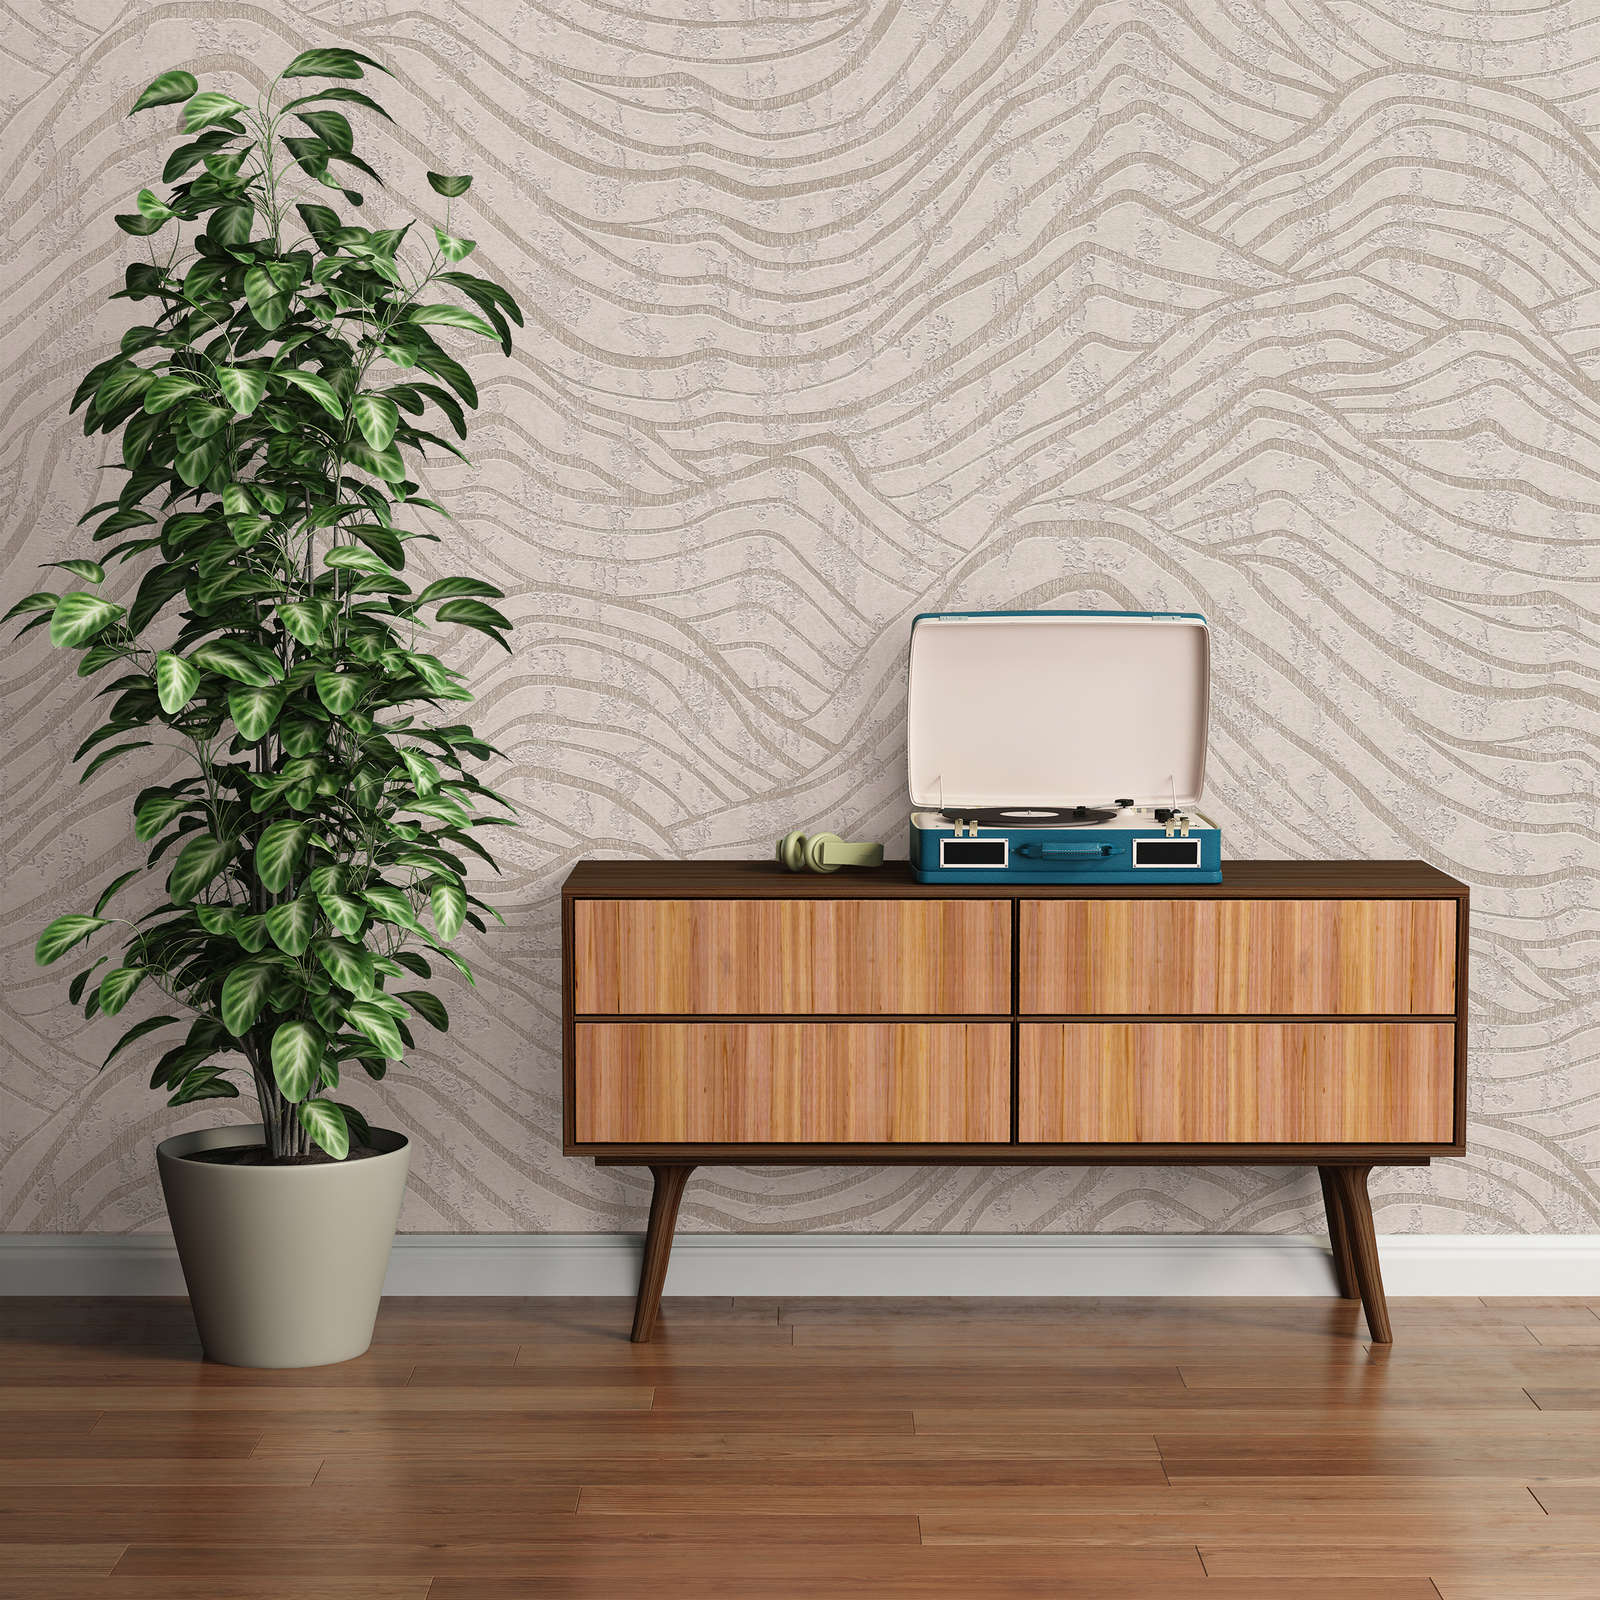             Abstract wallpaper with hill pattern in soft colours - white, silver
        